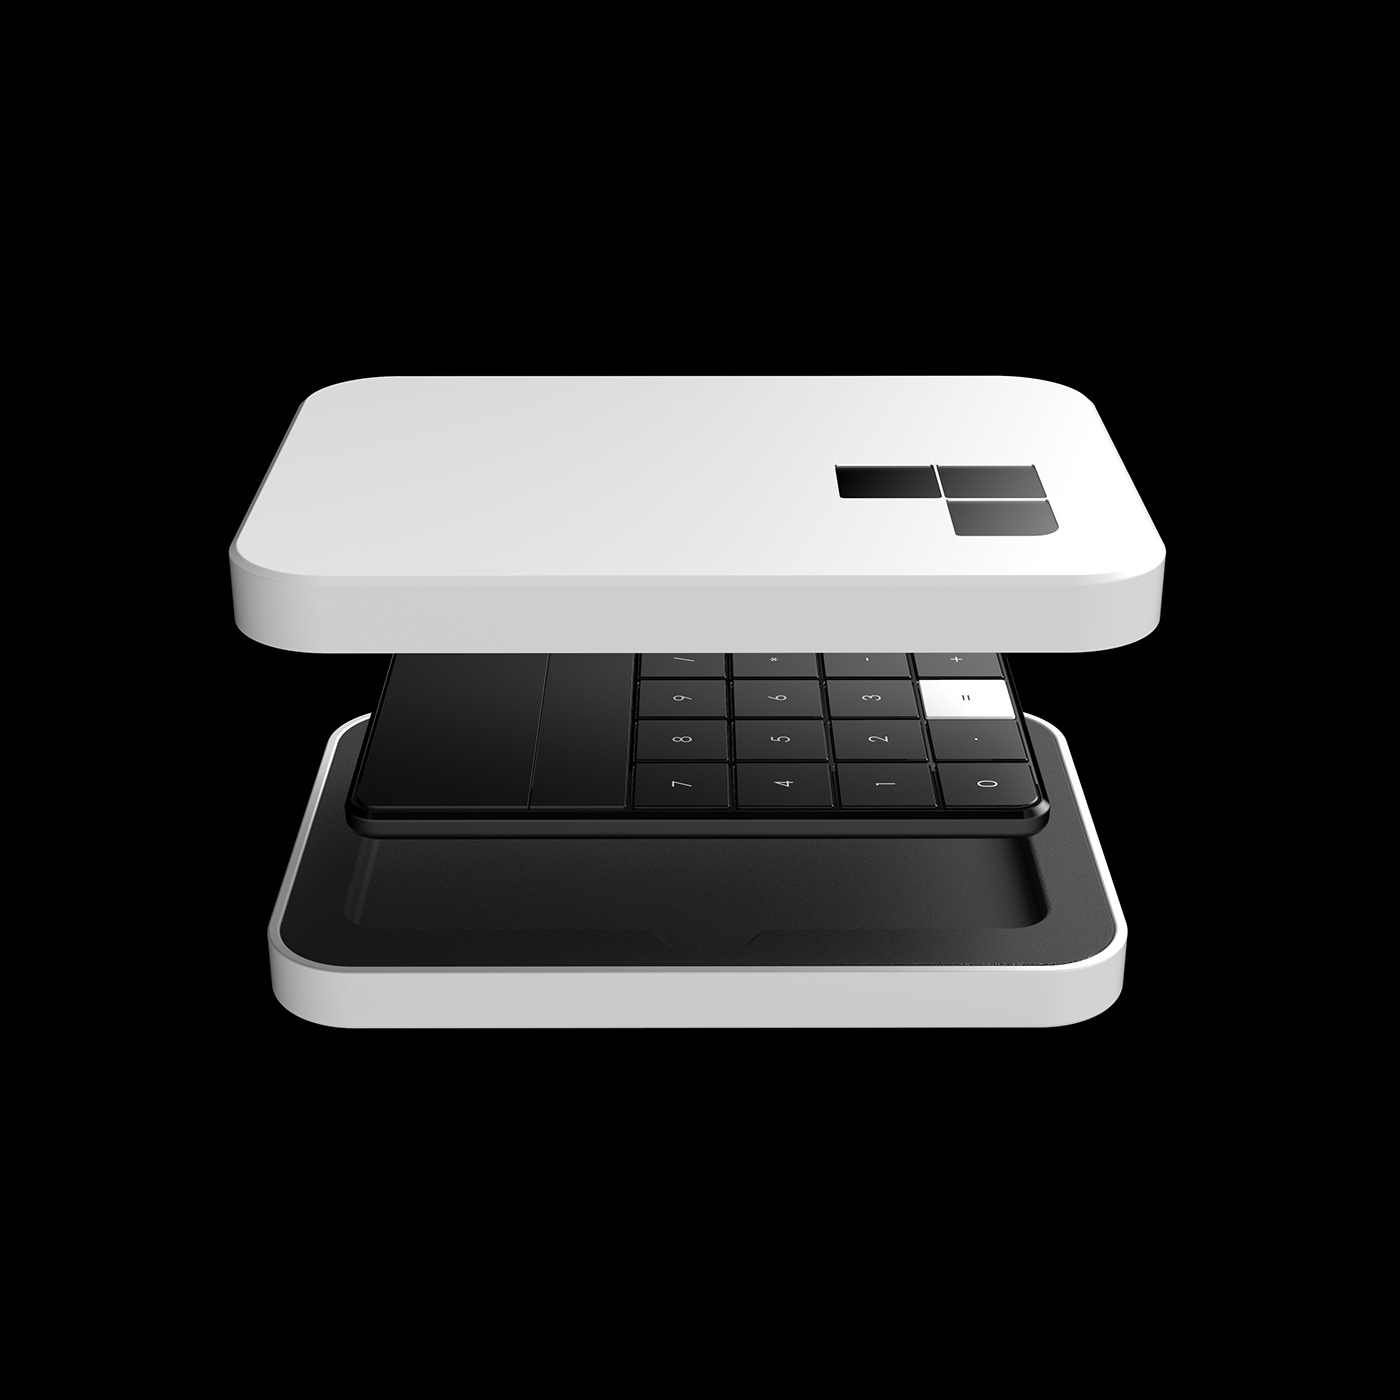 calculator minimal simple redesign minimalistic black and white design Project industrial product